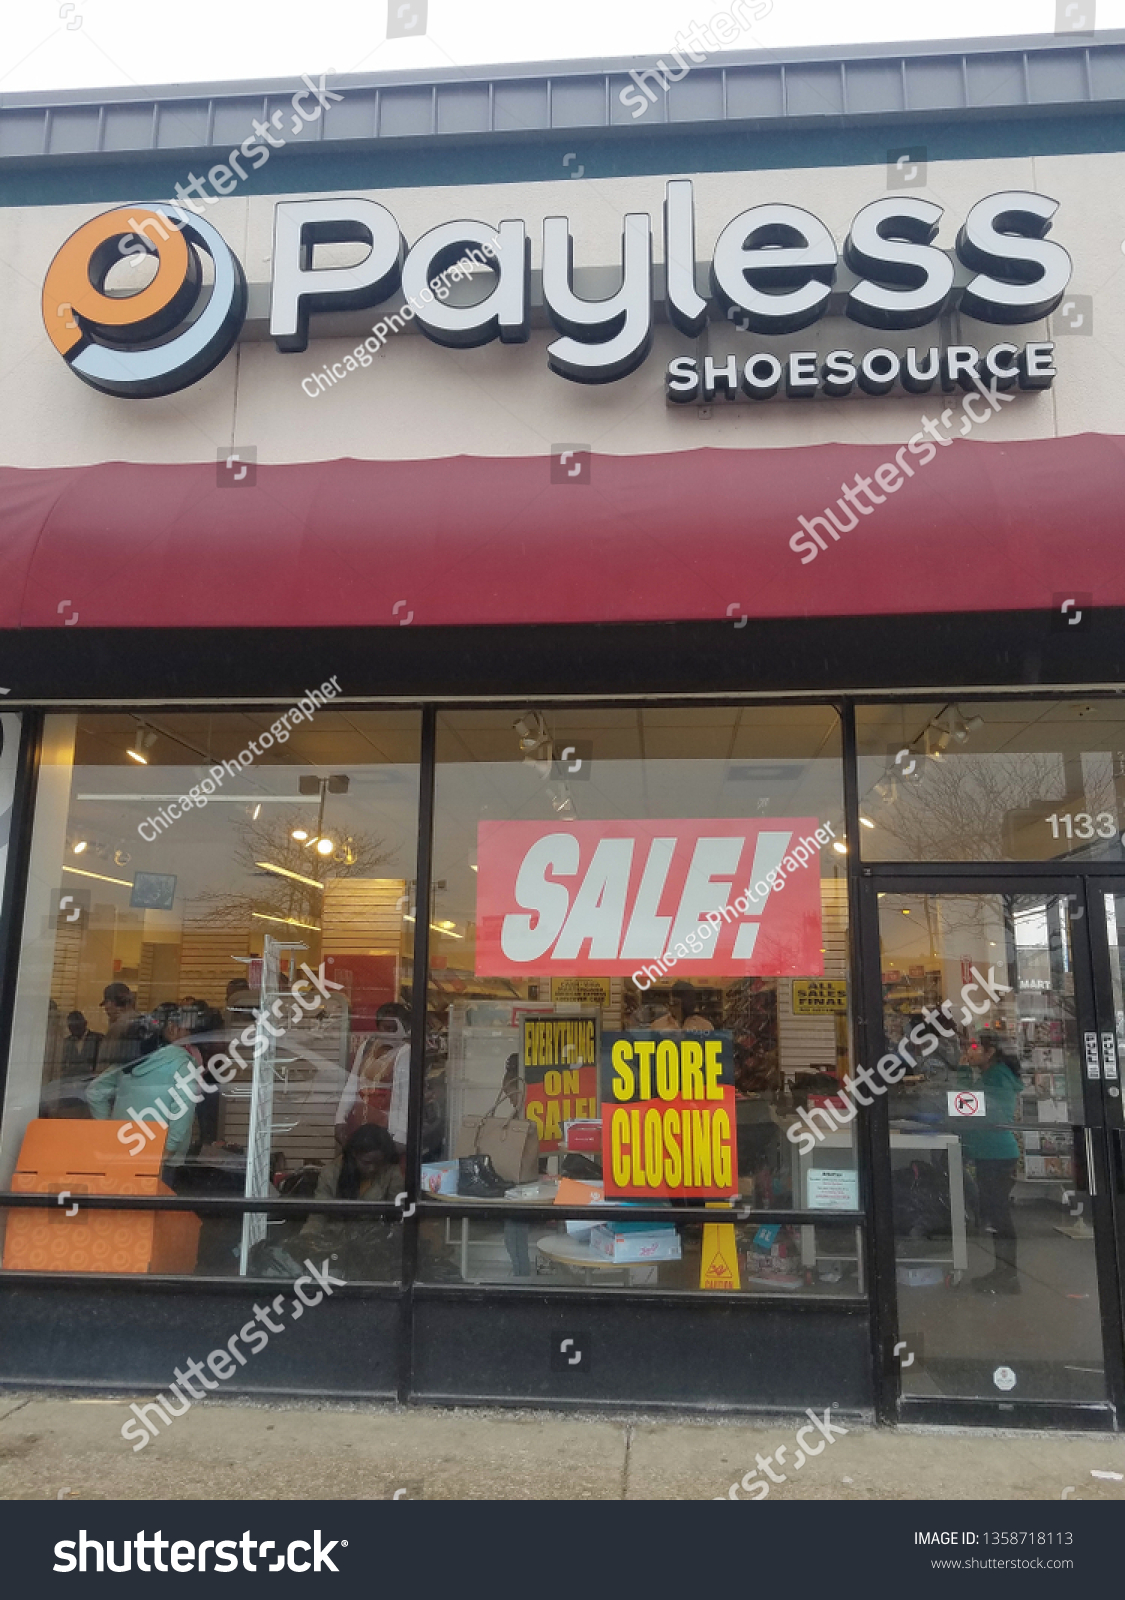 Payless Shoesource Front Entrance Sign 